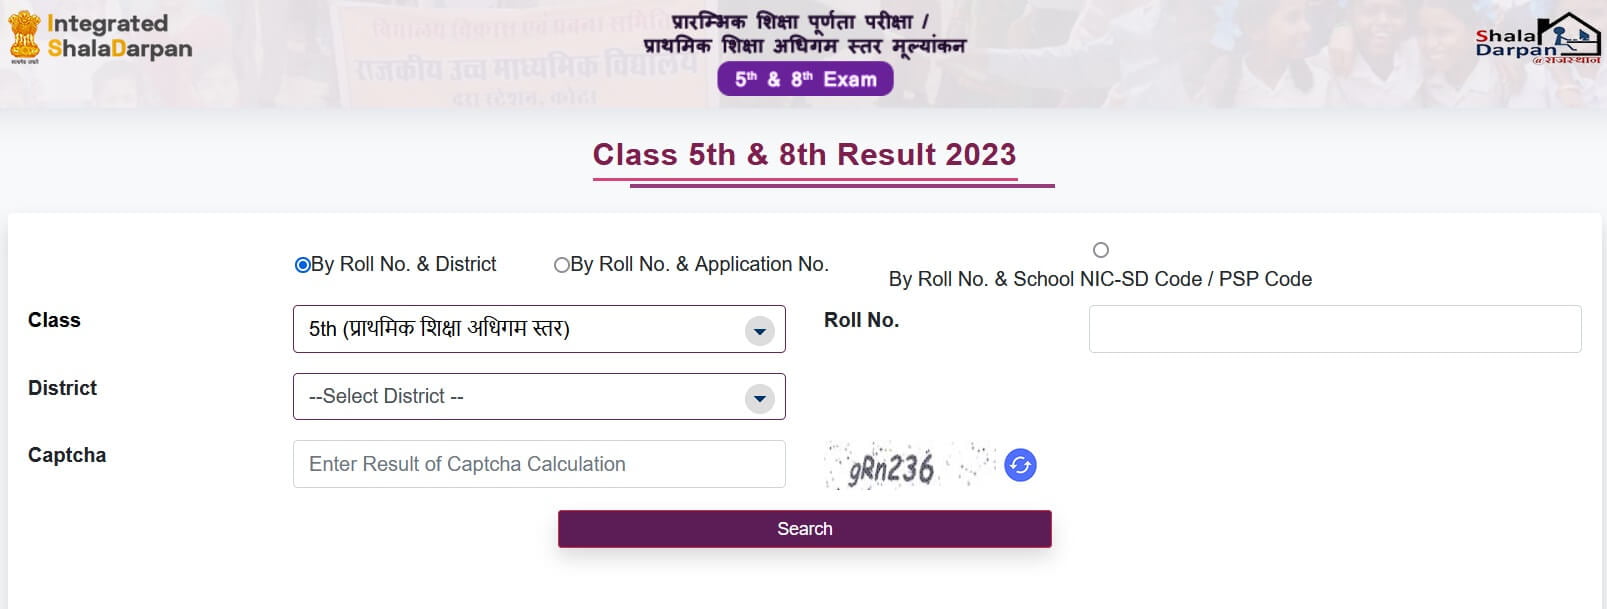 Class 5th and 8th Exam Result Shala Darpan